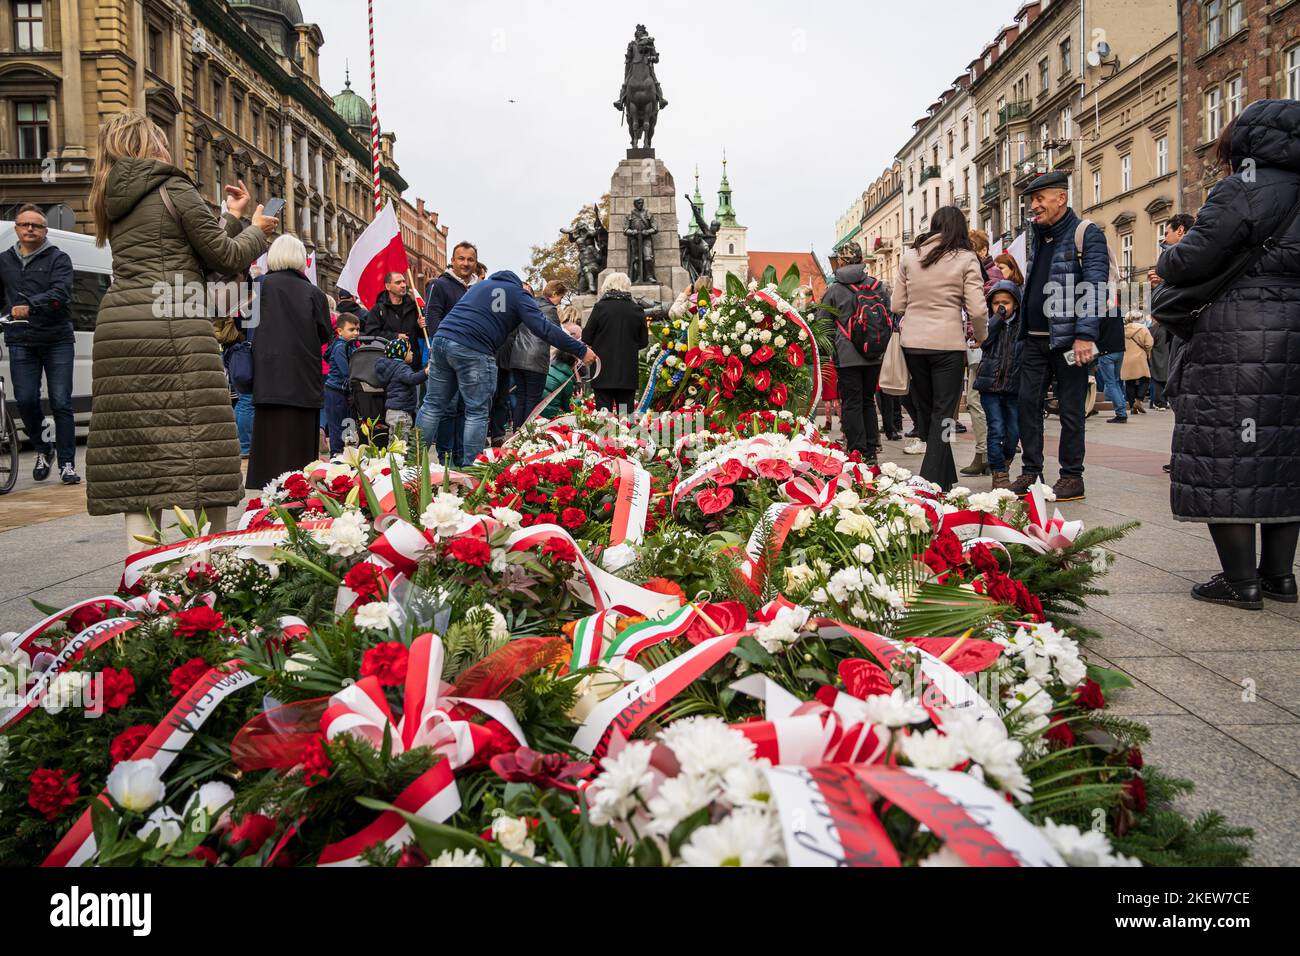 Poland Independence Day in Krakow. People leaving flowers with Polish flags next to Grunwald Monument at Plac Matejki. Krakow, Poland - November 11, 2022. Stock Photo